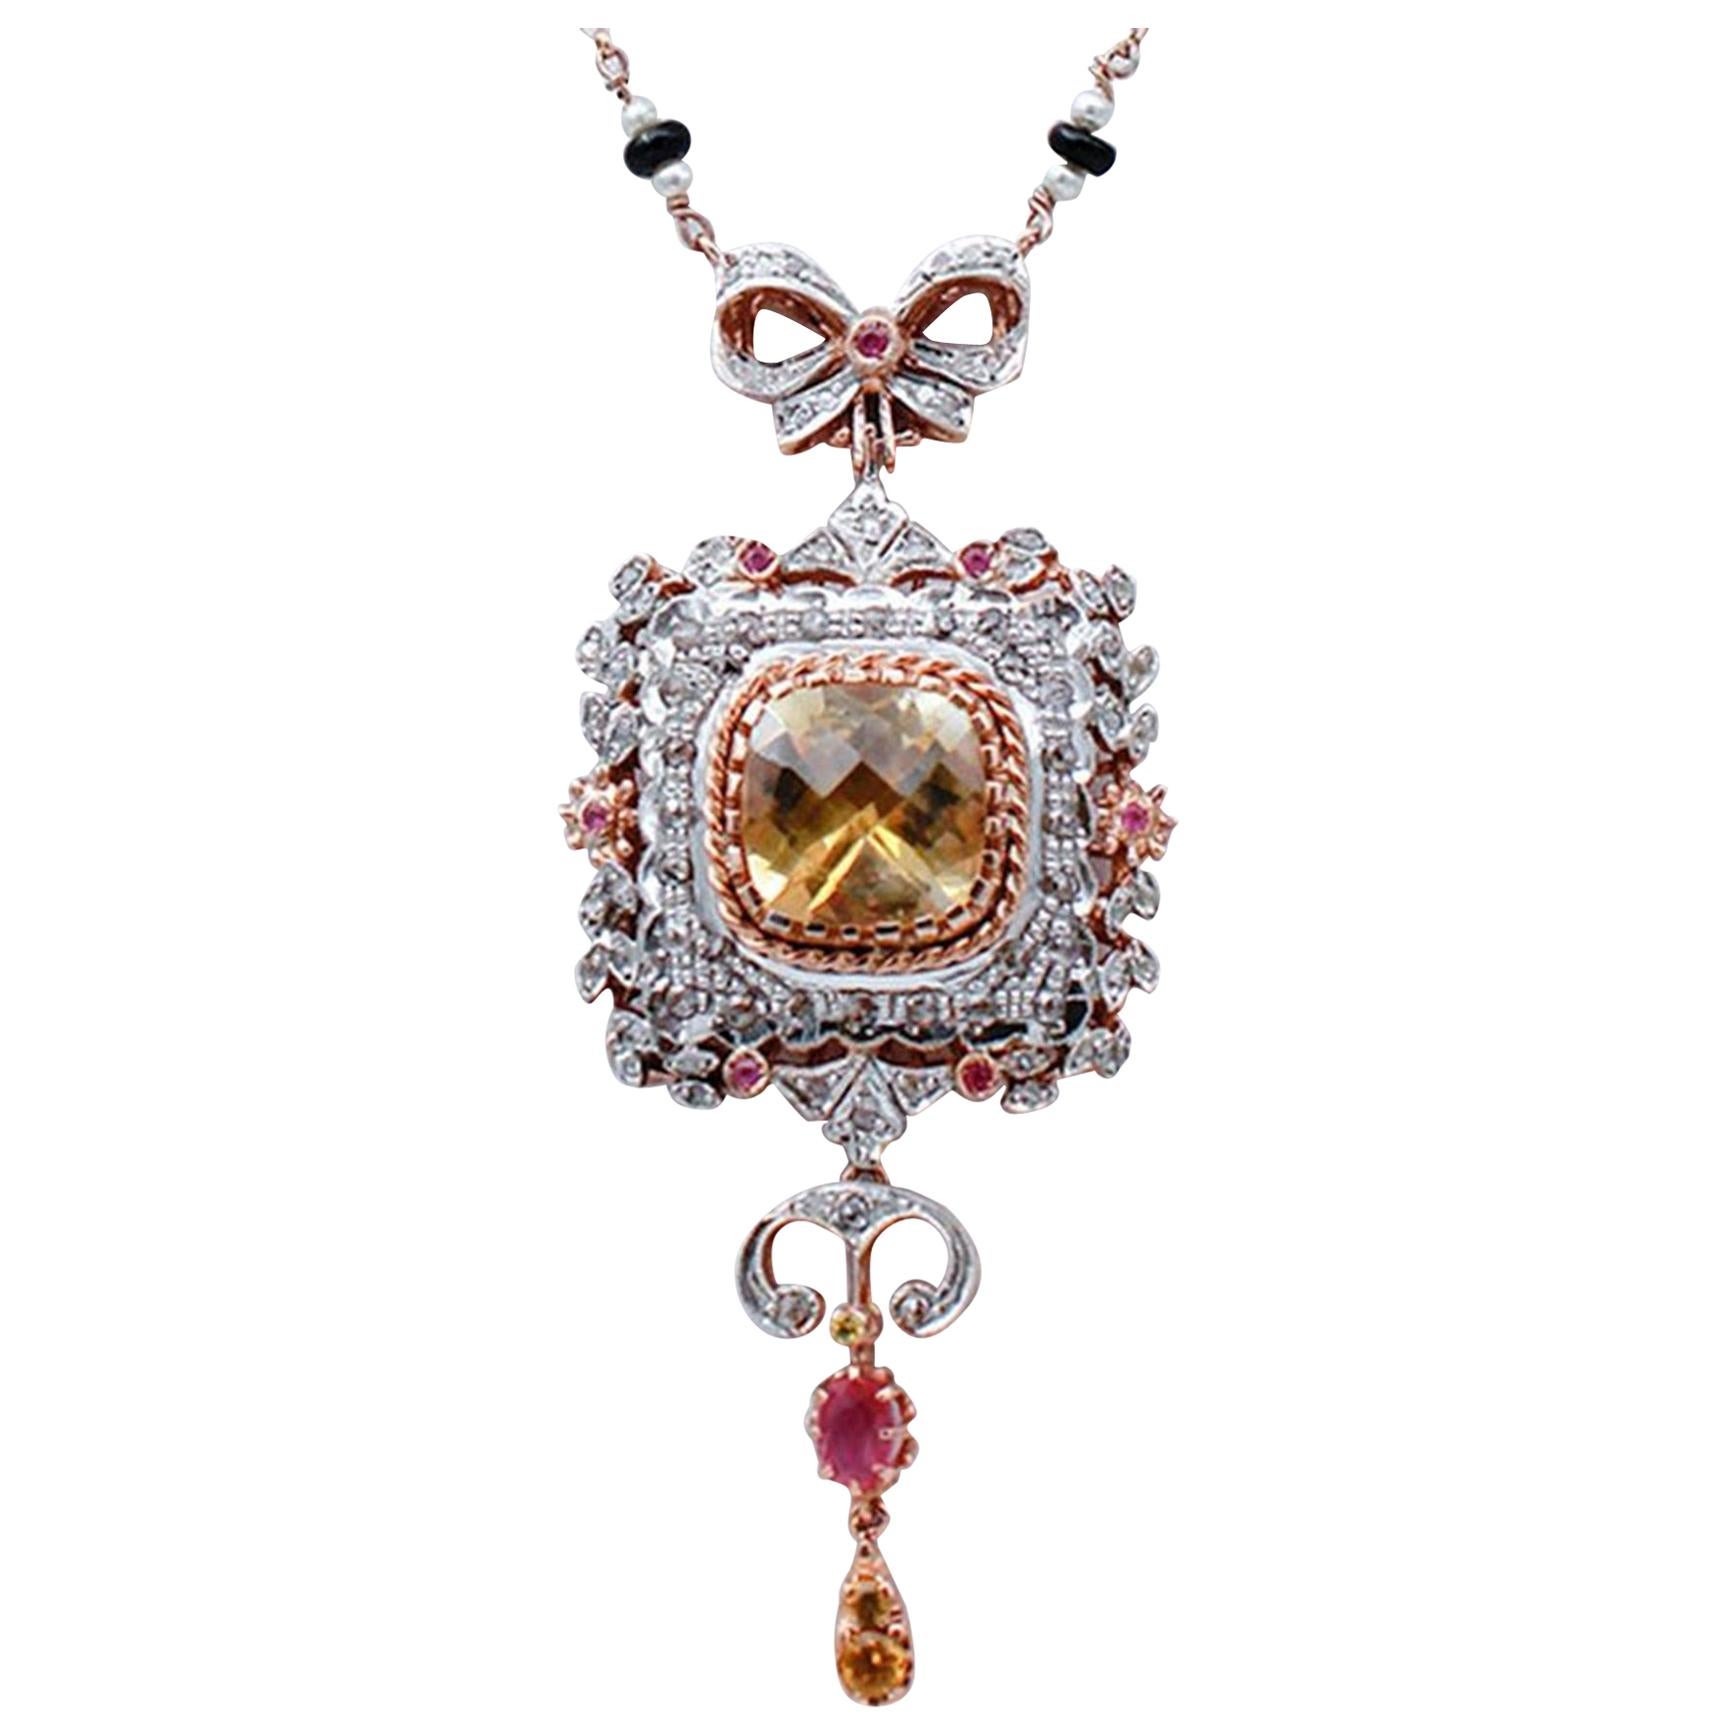 Diamonds, Topaz, Rubies, Onyx, Pearls, 9kt Rose Gold and Silver Retrò Necklace